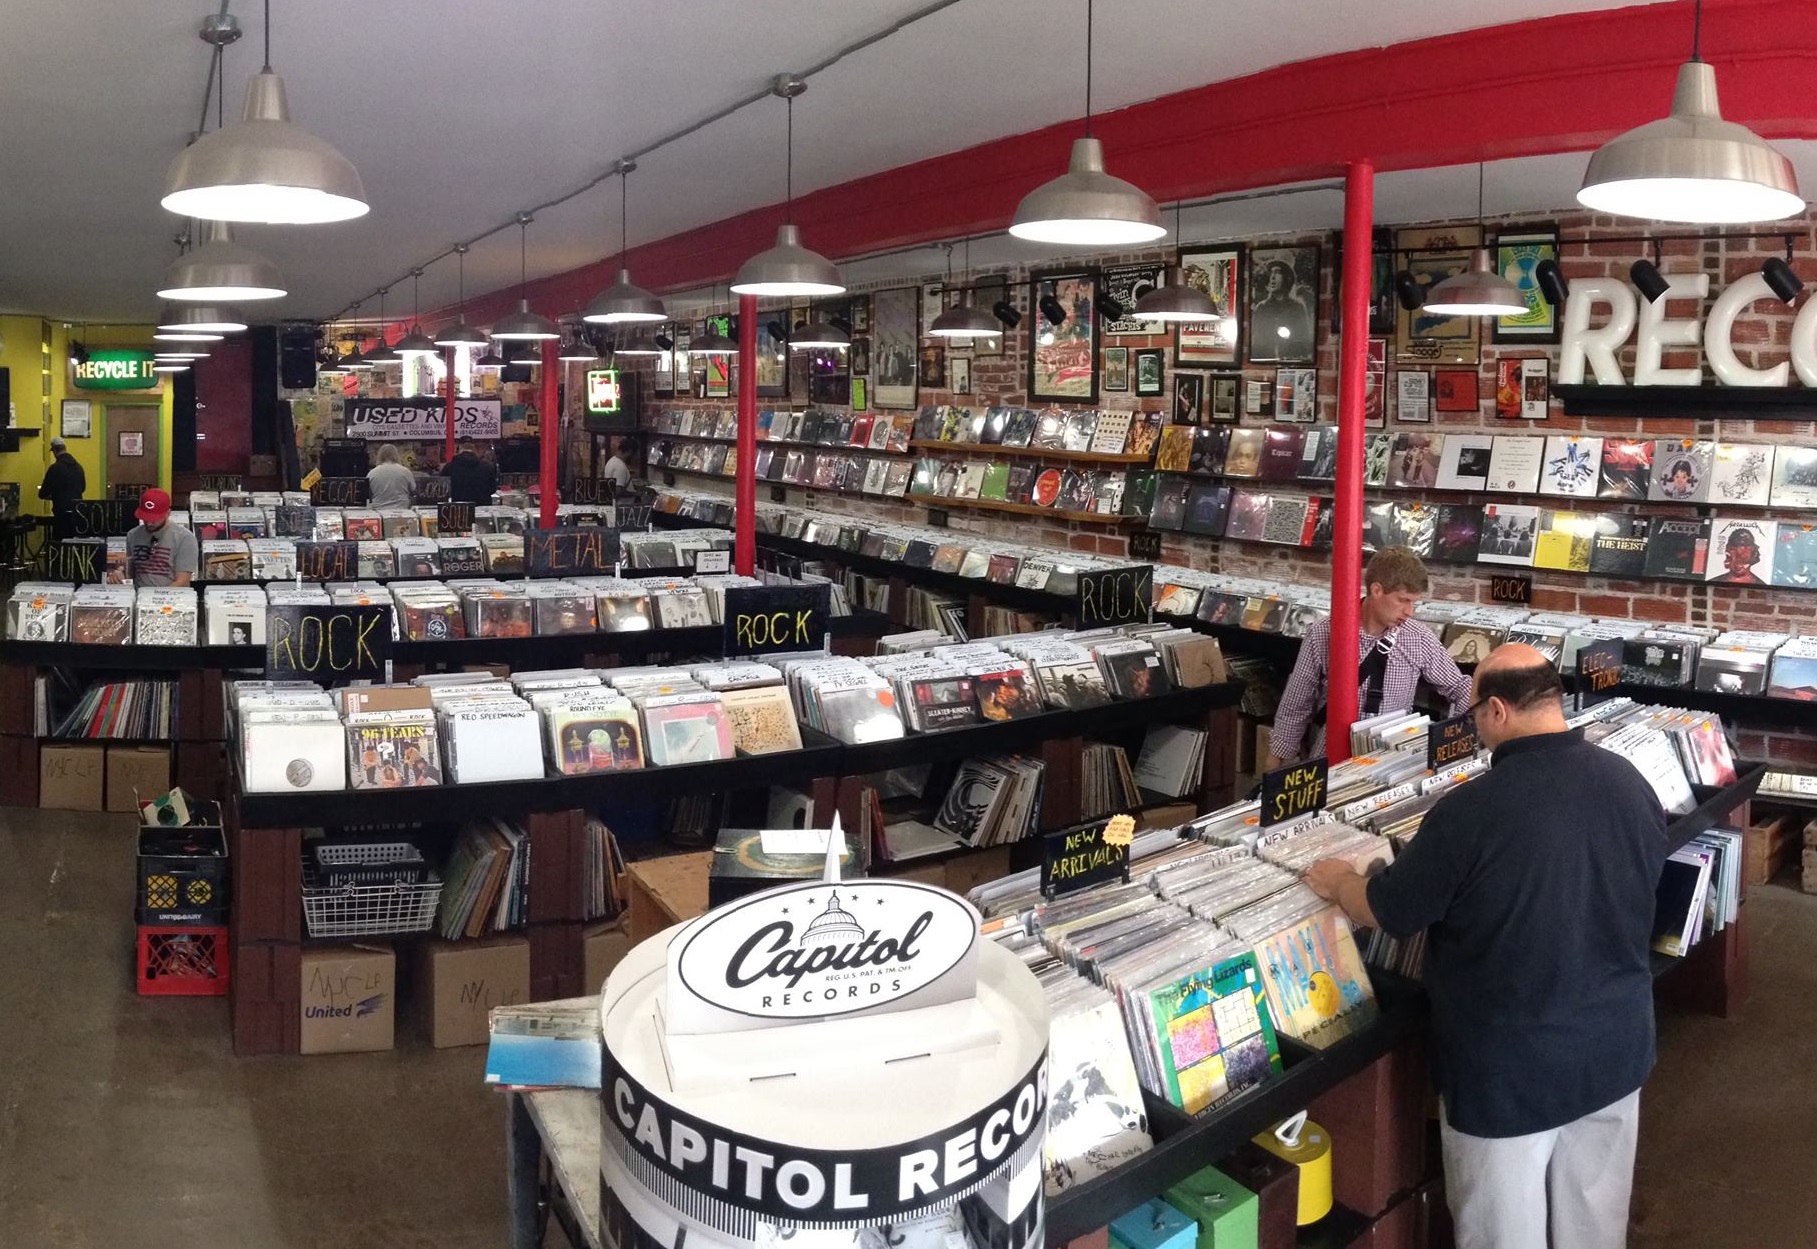 View of aisles and shoppers inside Used Kids record store